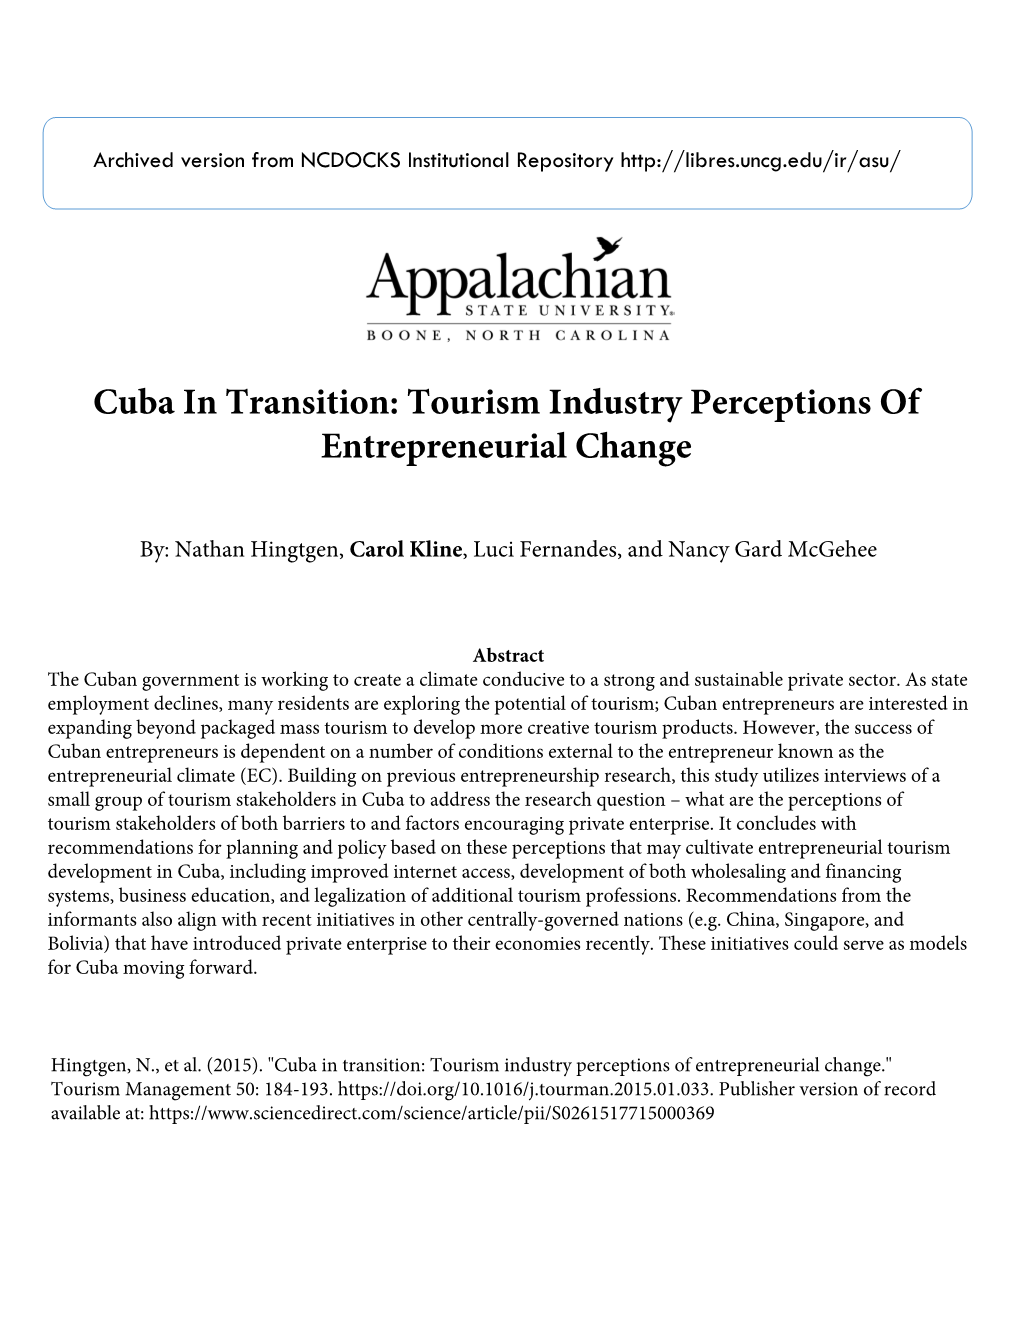 Cuba in Transition: Tourism Industry Perceptions of Entrepreneurial Change